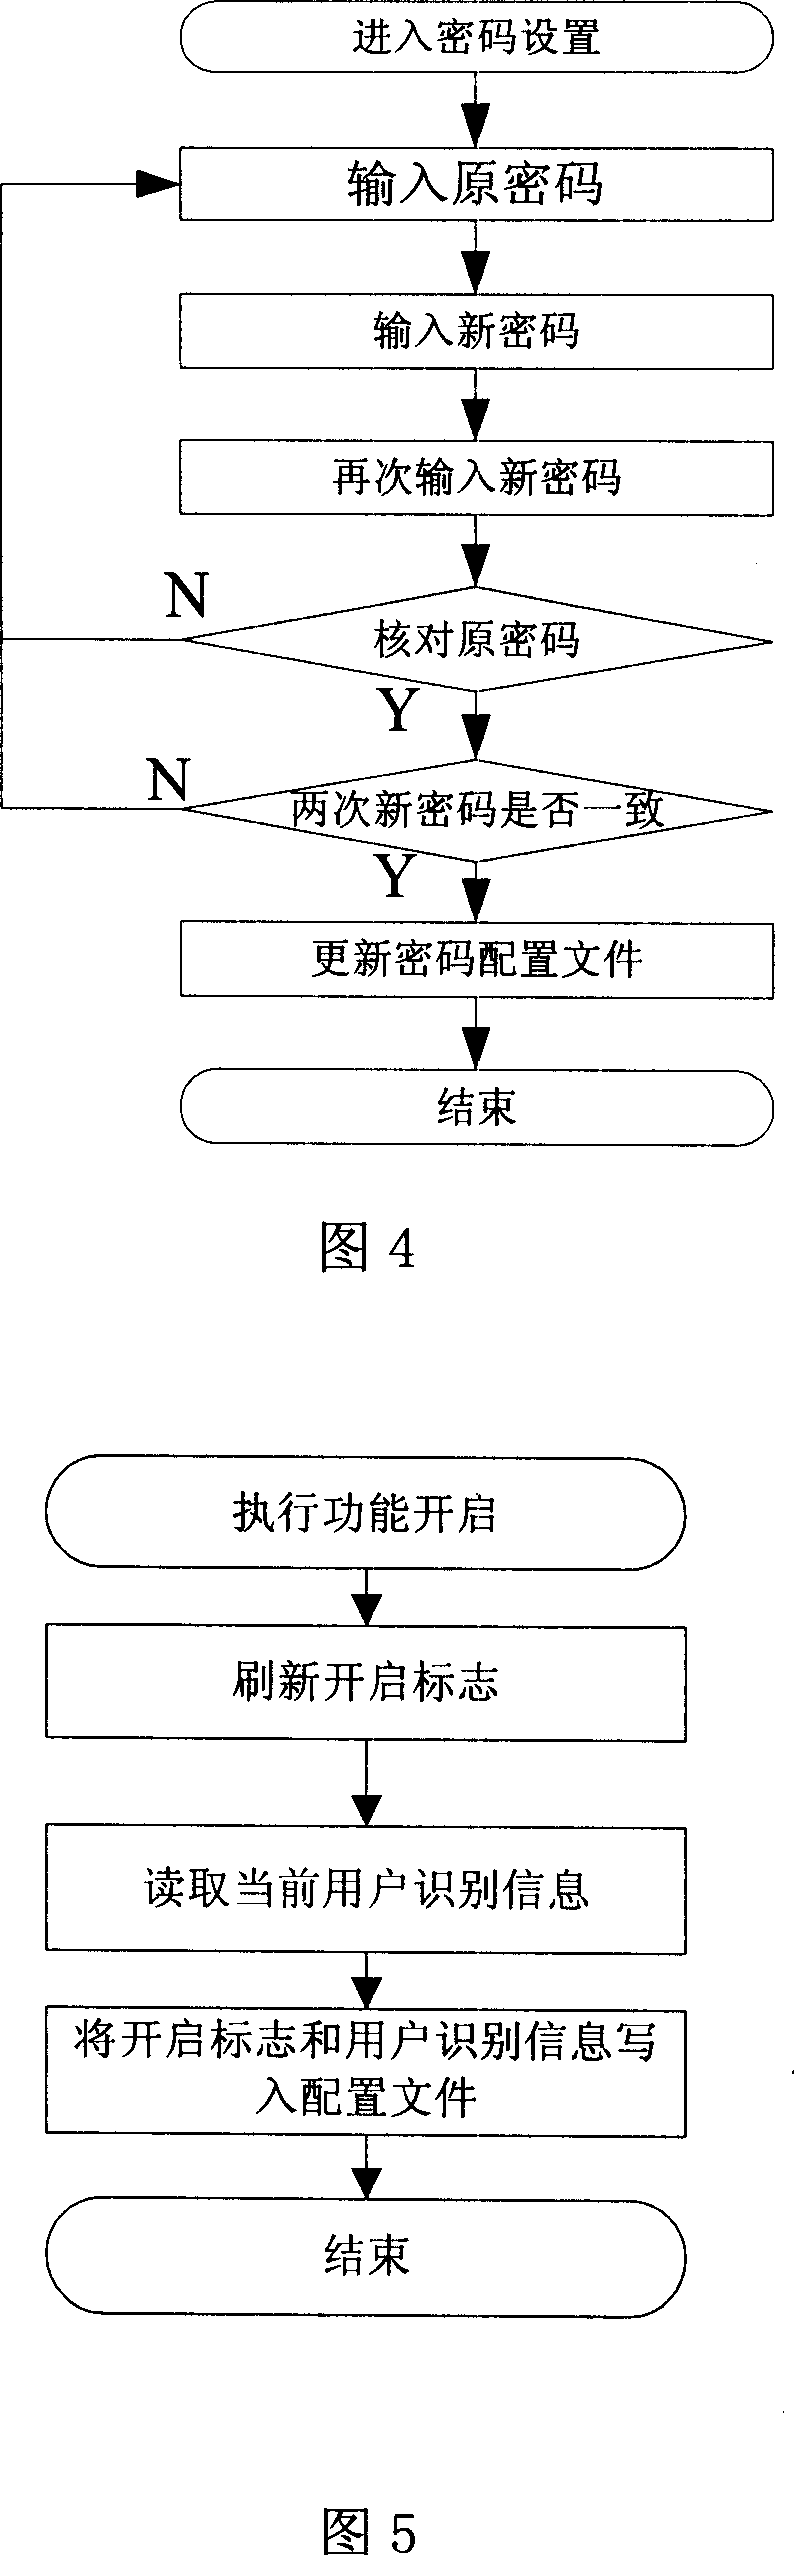 Mobile terminal with lost tracking function and lost tracking method of mobile terminal